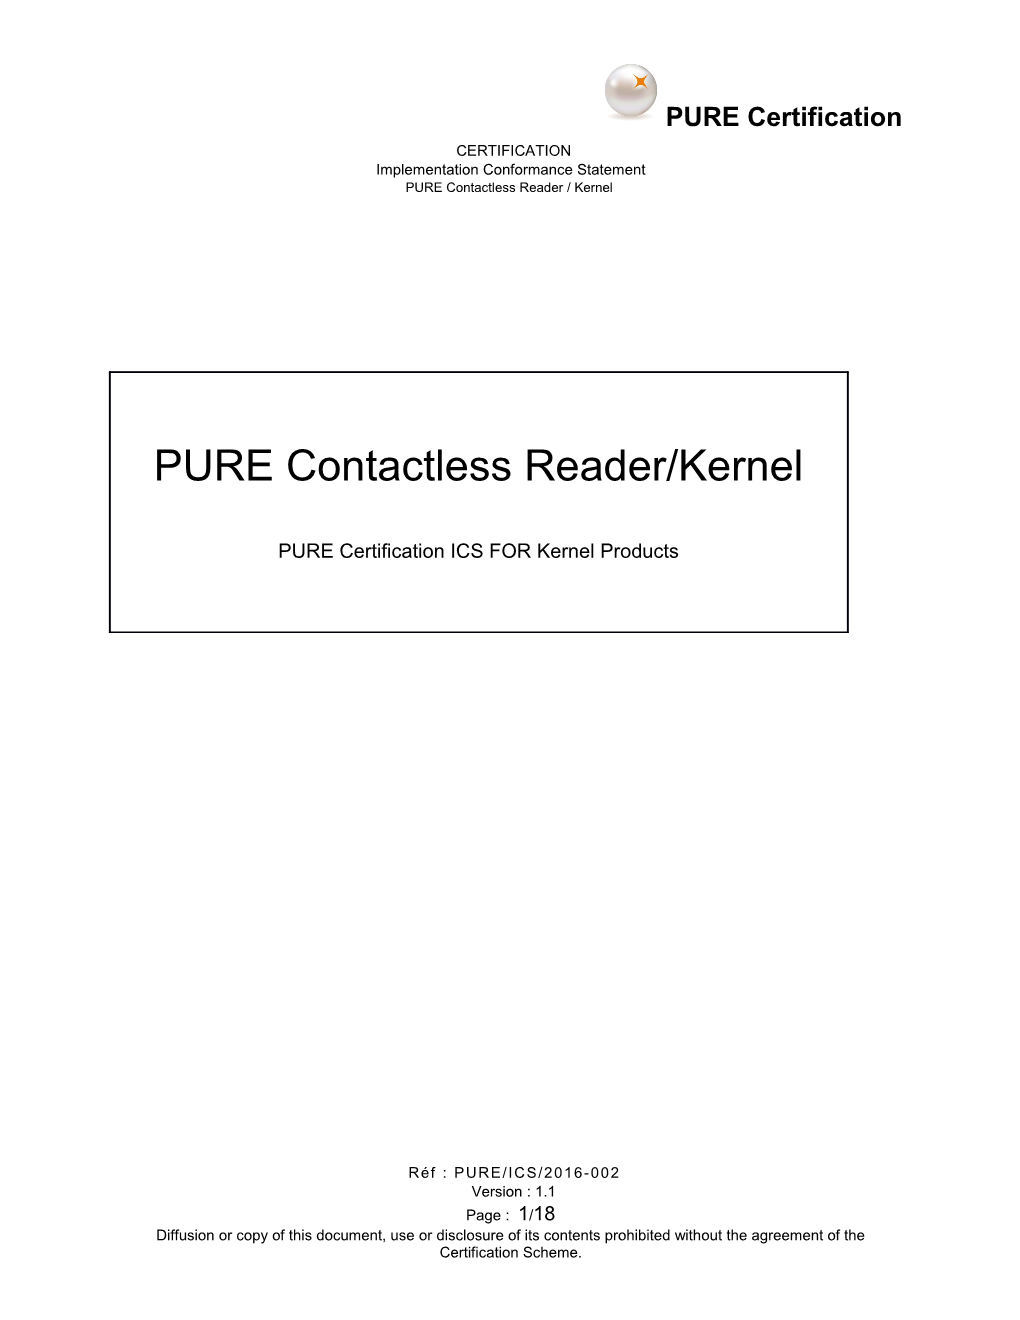 PURE Certification ICS for Kernel Products